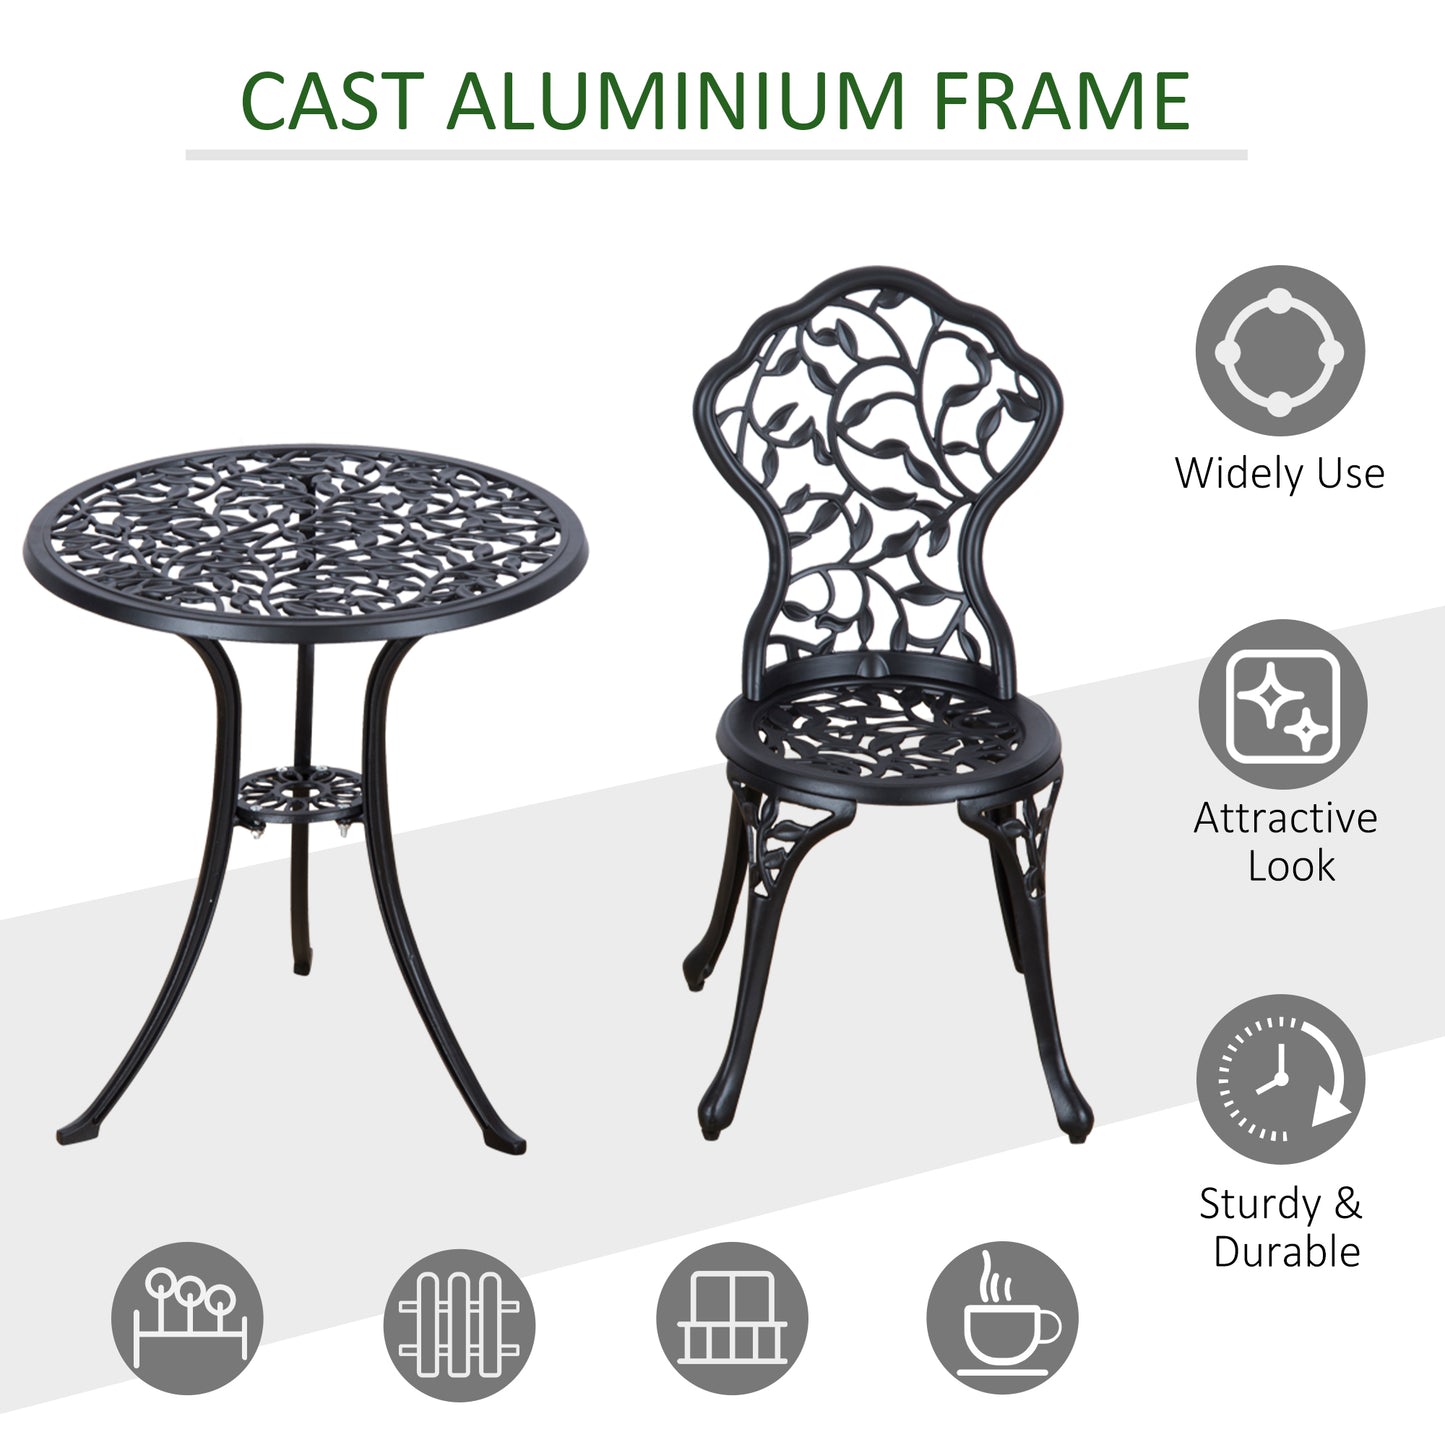 Outsunny Cast Aluminium Bistro Set: Antique Style 3-Piece Garden Furniture with Table & Chairs, Outdoor Seating